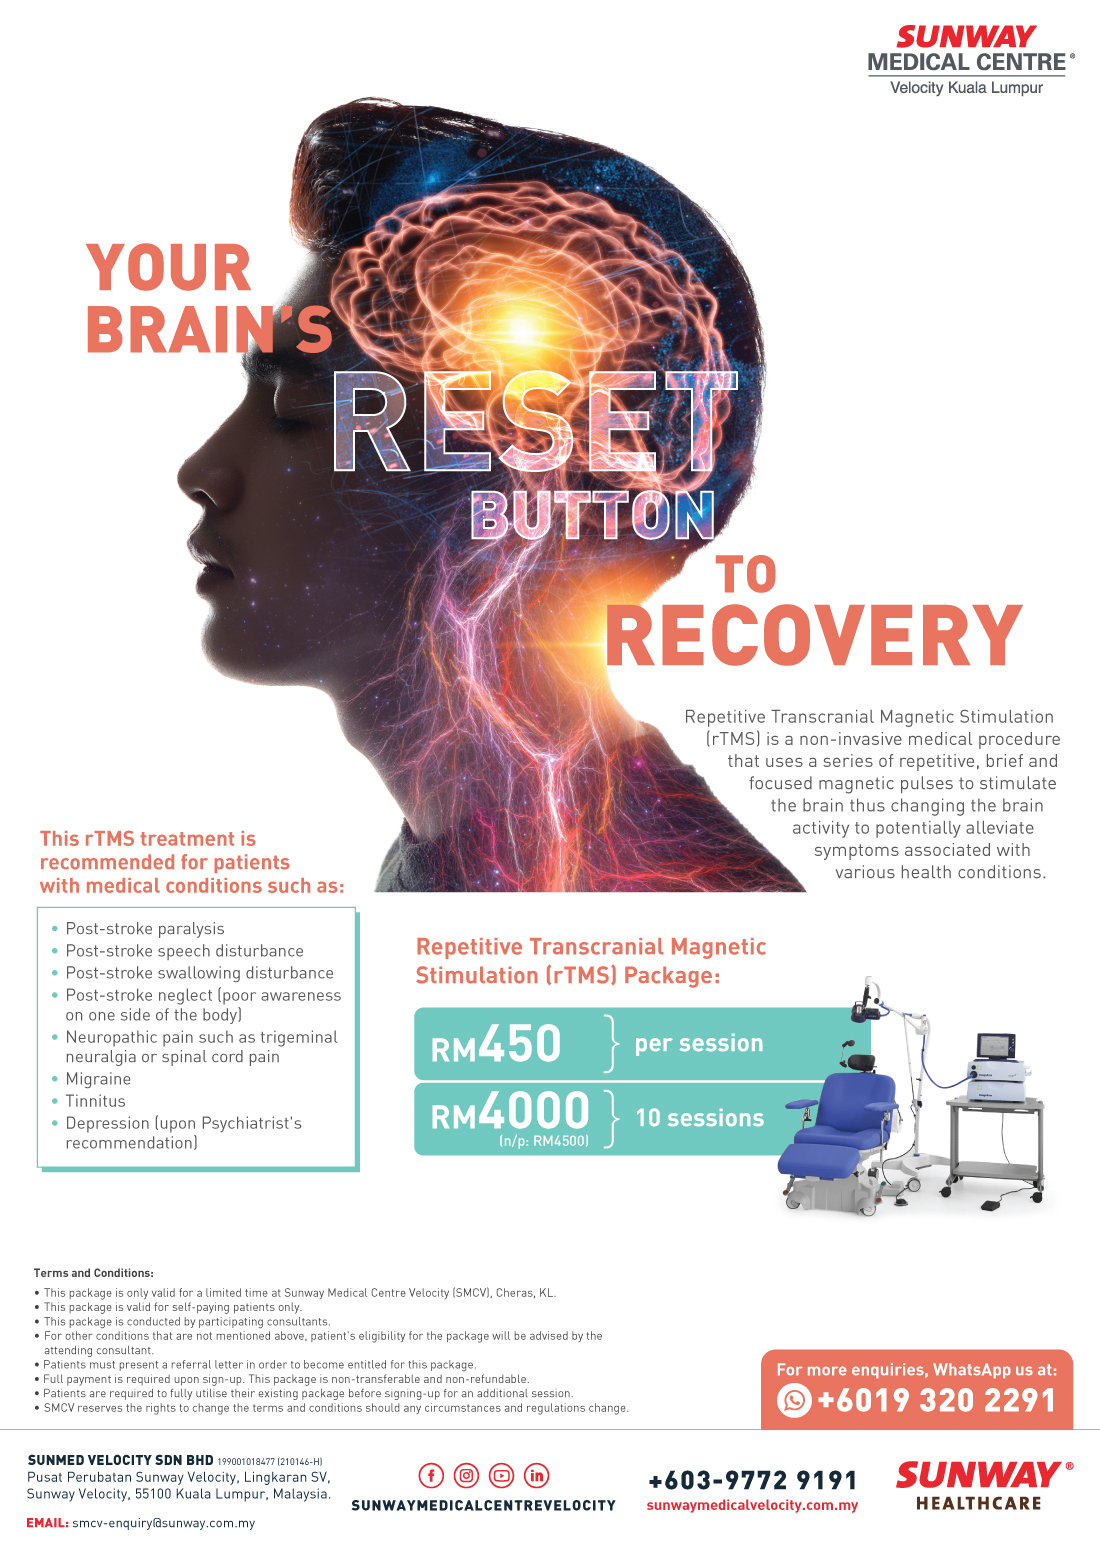 Repetitive Transcranial Magnetic Stimulation (rTMS) Package